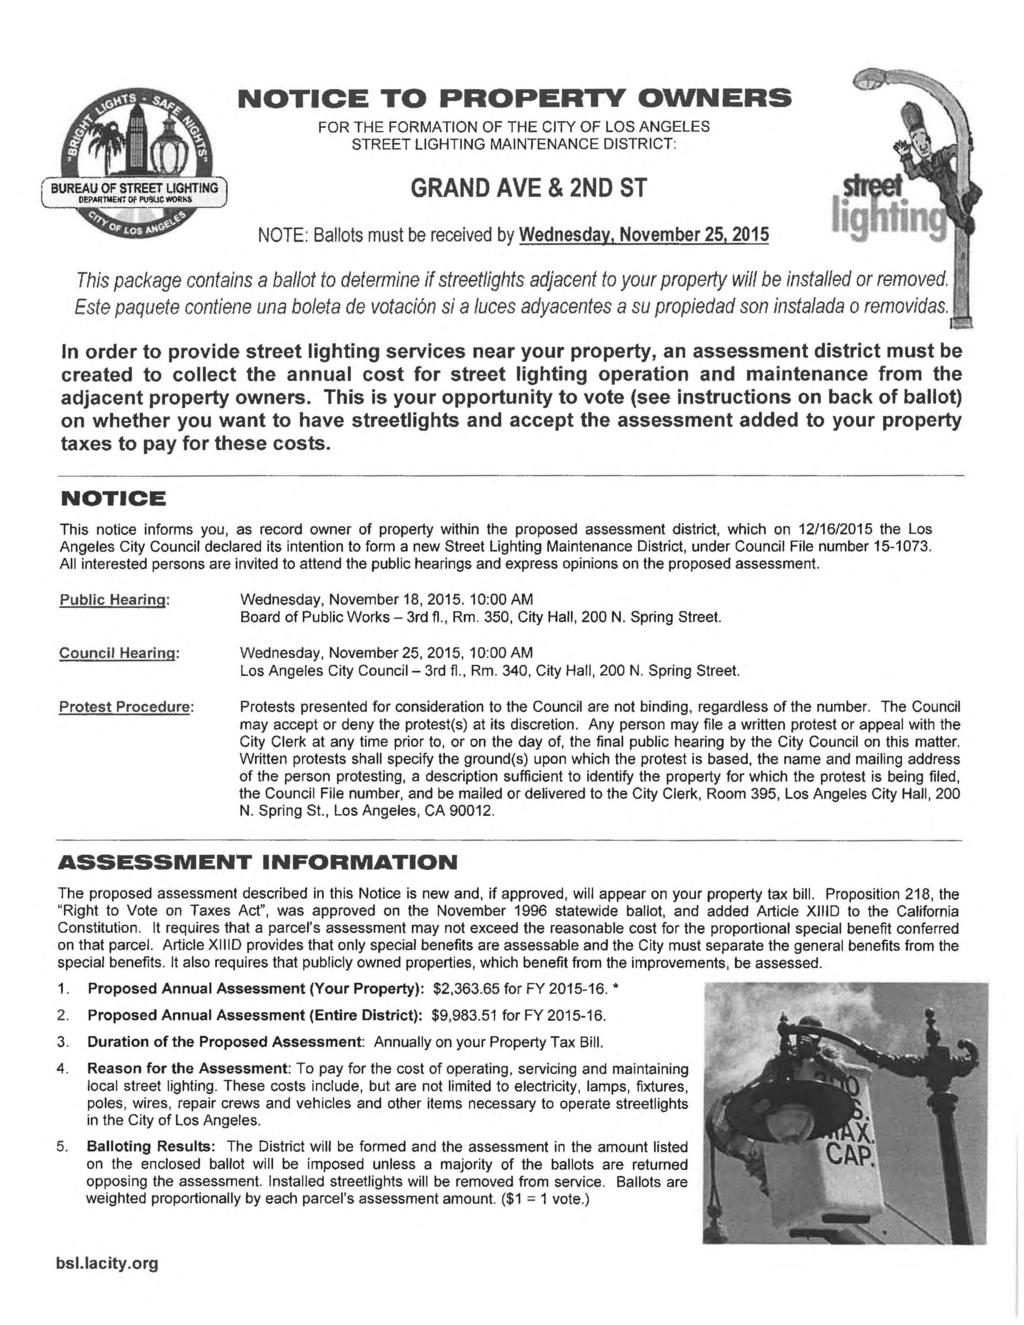 f BUREAU OF STREET LIGHTING I DBPARtwent of njsuc worn NOTICE TO PROPERTY OWNERS FOR THE FORMATION OF THE CITY OF LOS ANGELES STREET LIGHTING MAINTENANCE DISTRICT: GRAND AVE & 2ND ST NOTE: Ballots